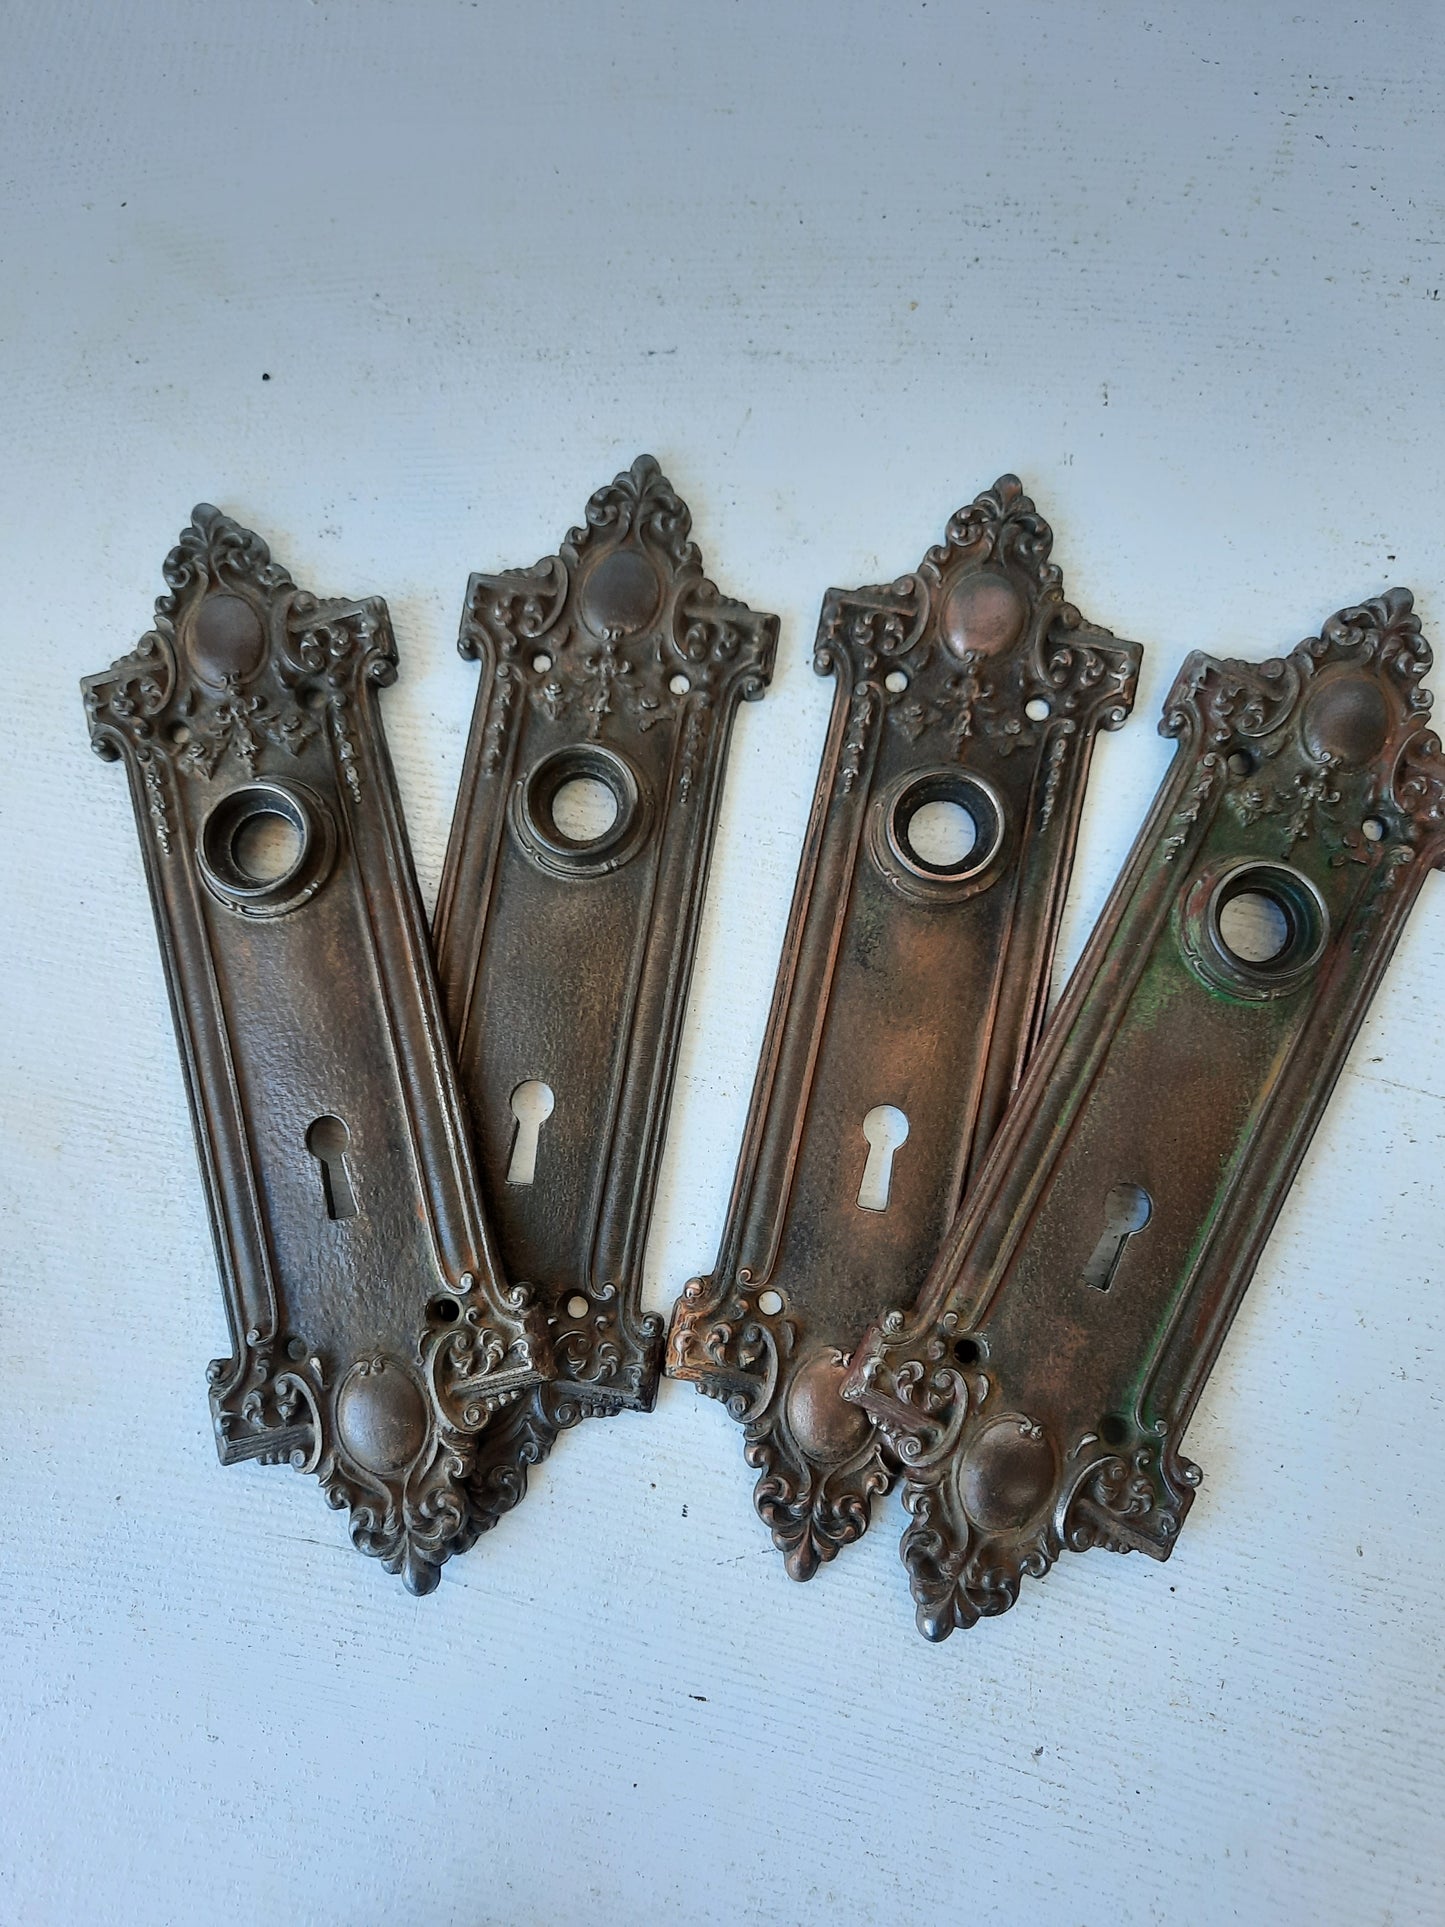 Reole Hardware Set, Reole Pattern Doorknobs and Backplates, Antique Cast Iron Door Hardware, Antique Salvage 100513